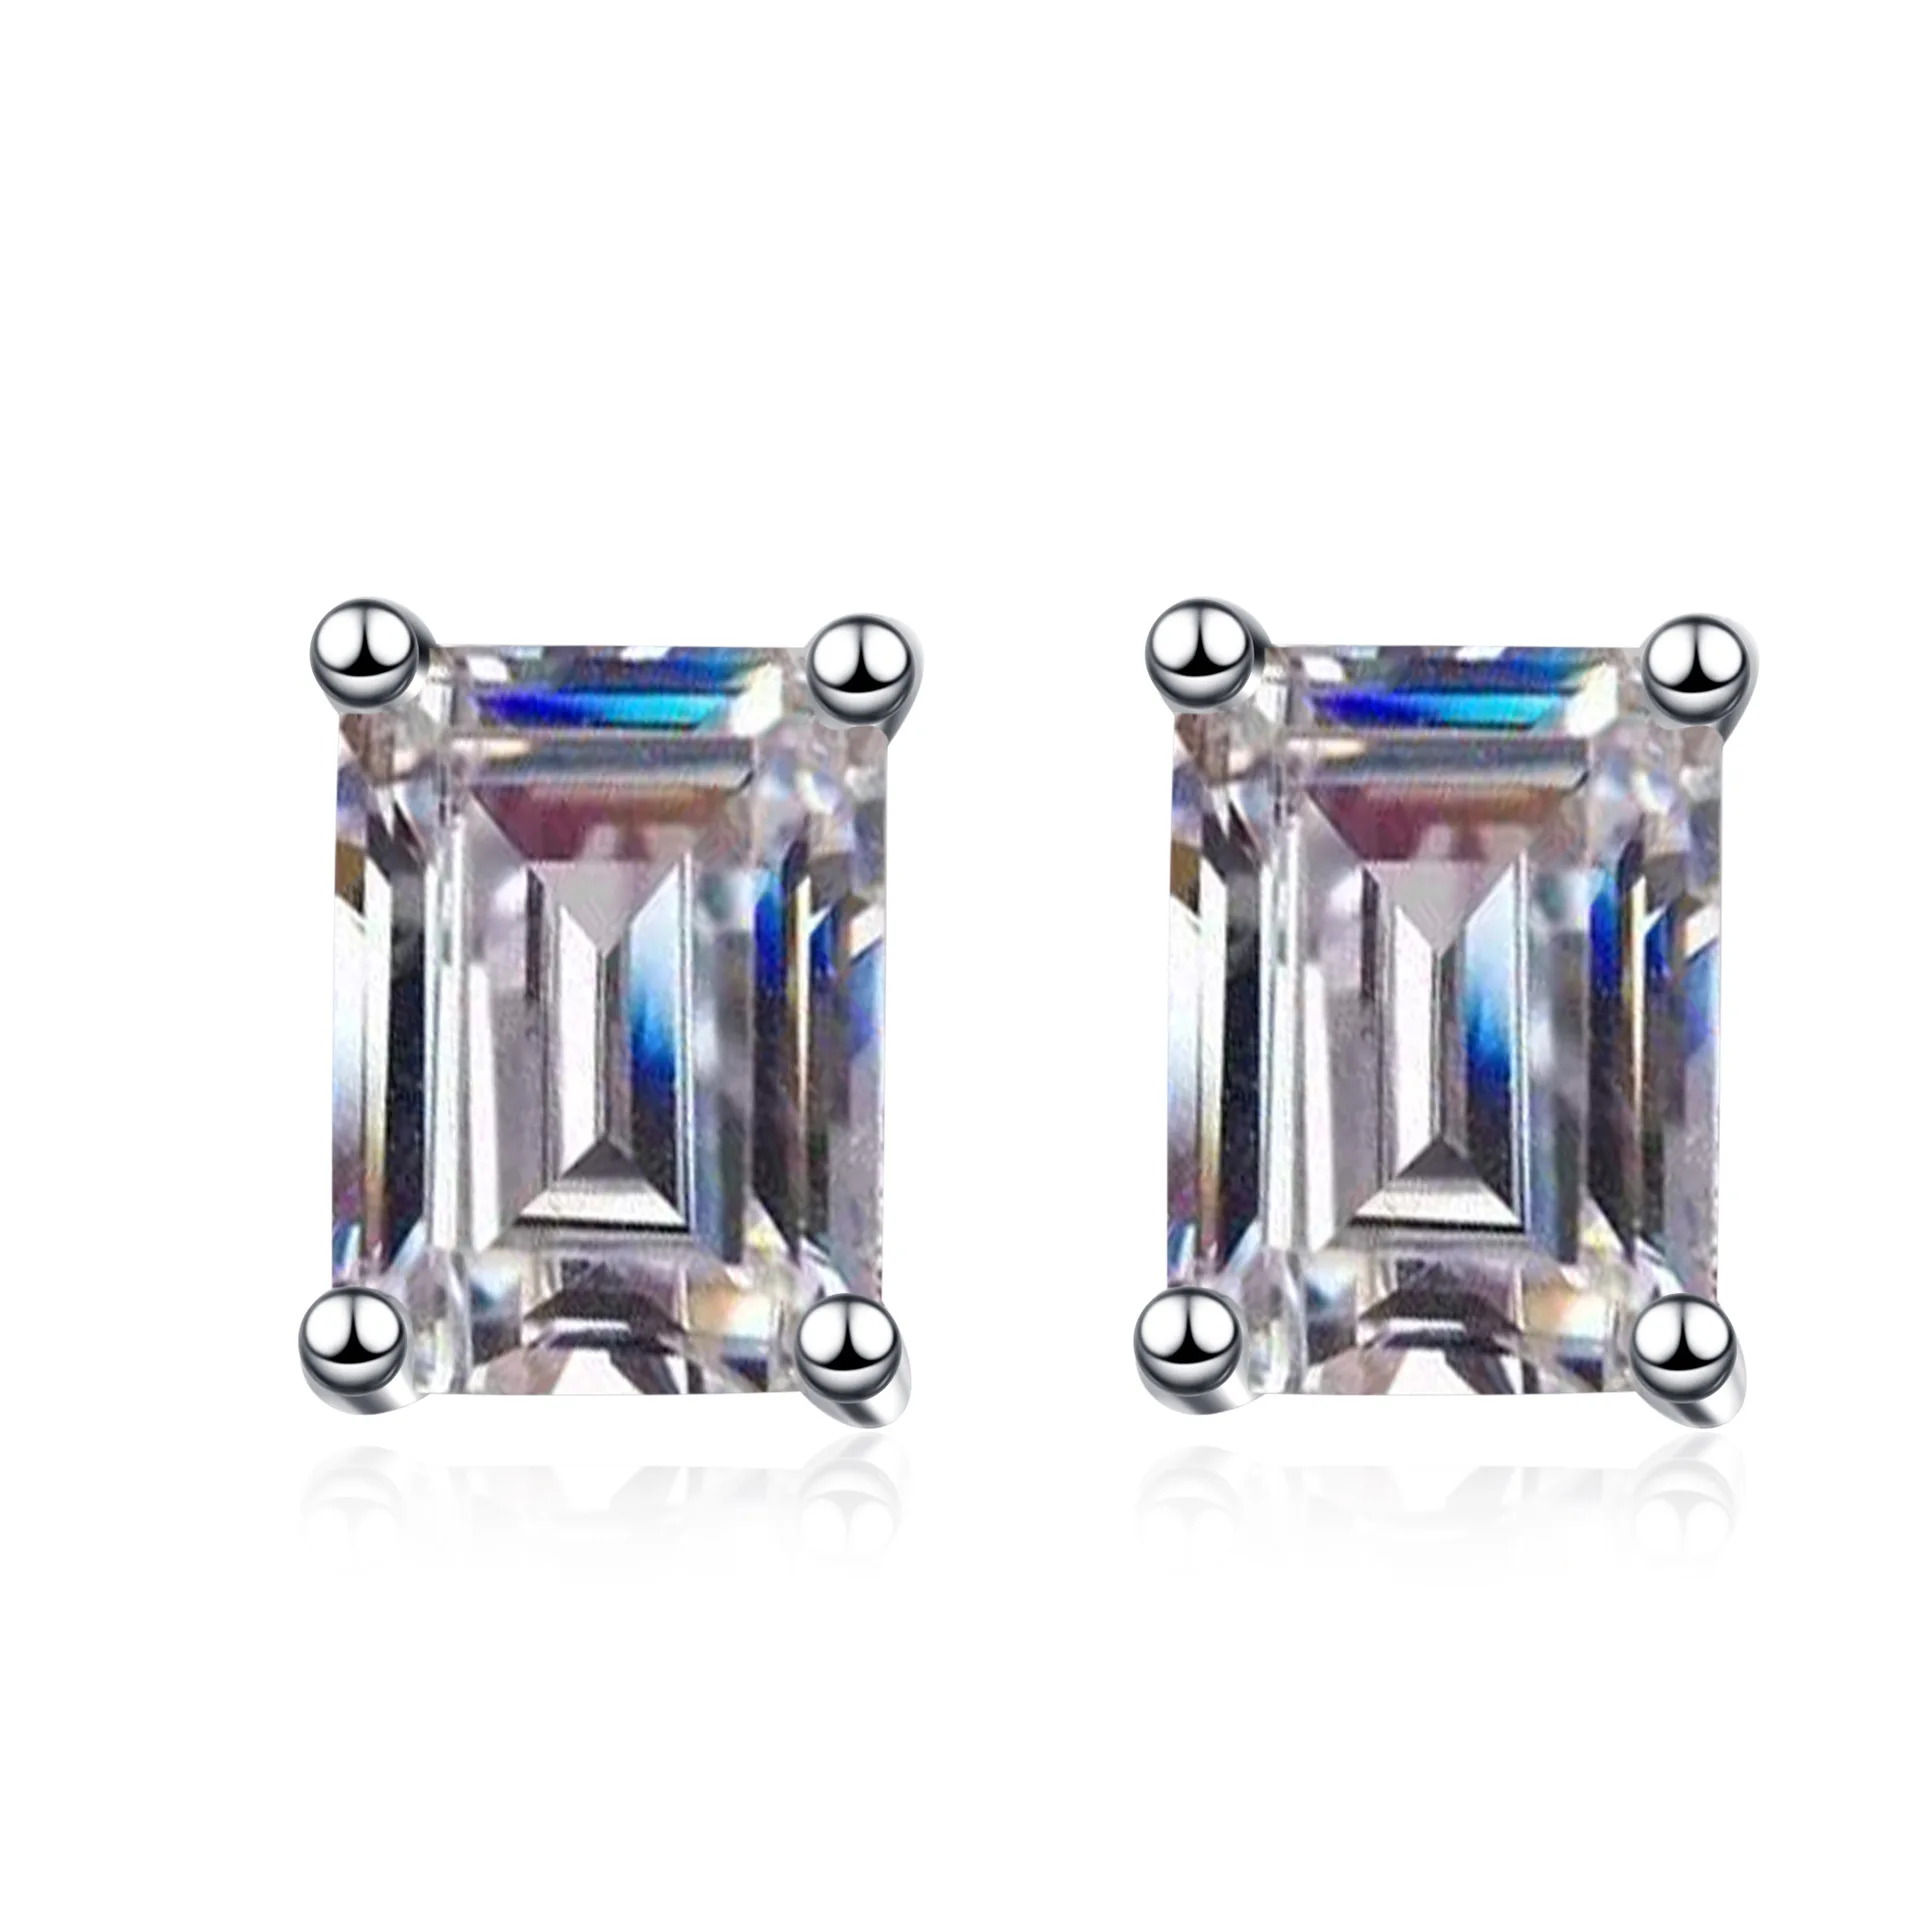 

Aisne 1ct 2ct 4ct Real Emerald Cut Moissanite Stud Earrings For Women Radiant Cut 925 Sterling Silver Sparkling Wedding Jewelry